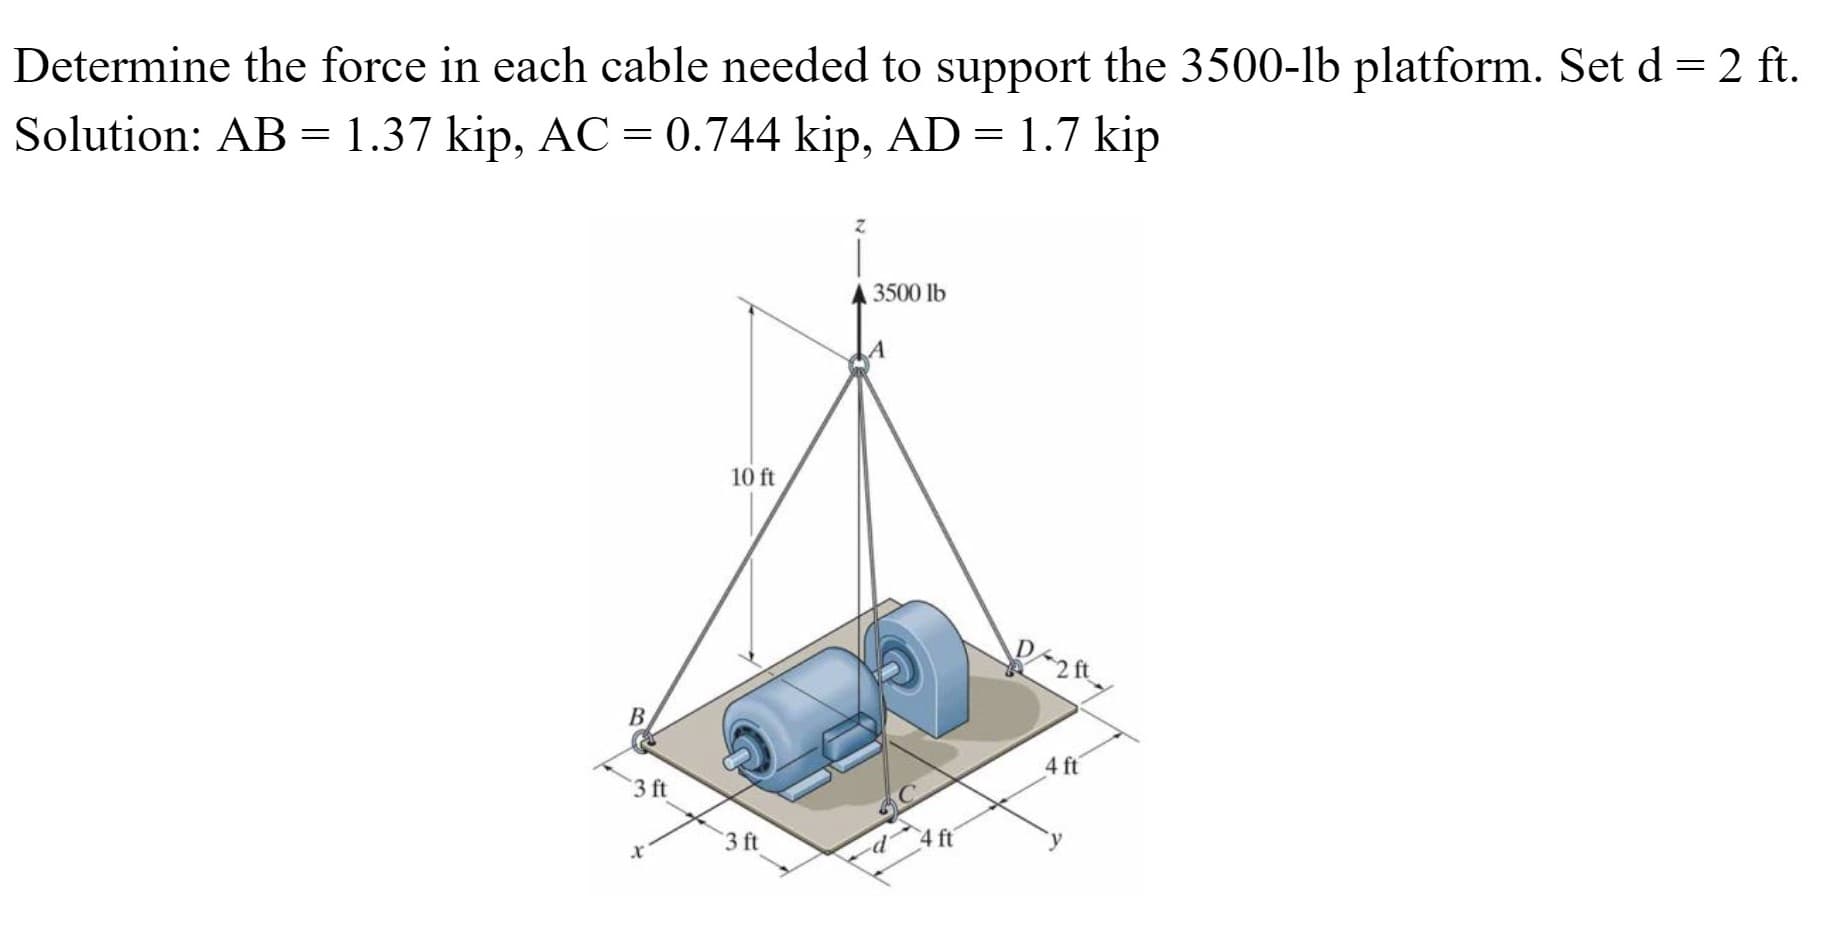 Determine the force in each cable needed to support the 3500-lb platform. Set d = 2 ft.
Solution: AB = 1.37 kip, AC = 0.744 kip, AD = 1.7 kip
3500 lb
10 ft
B.
4 ft
3 ft
3 ft
4 ft
